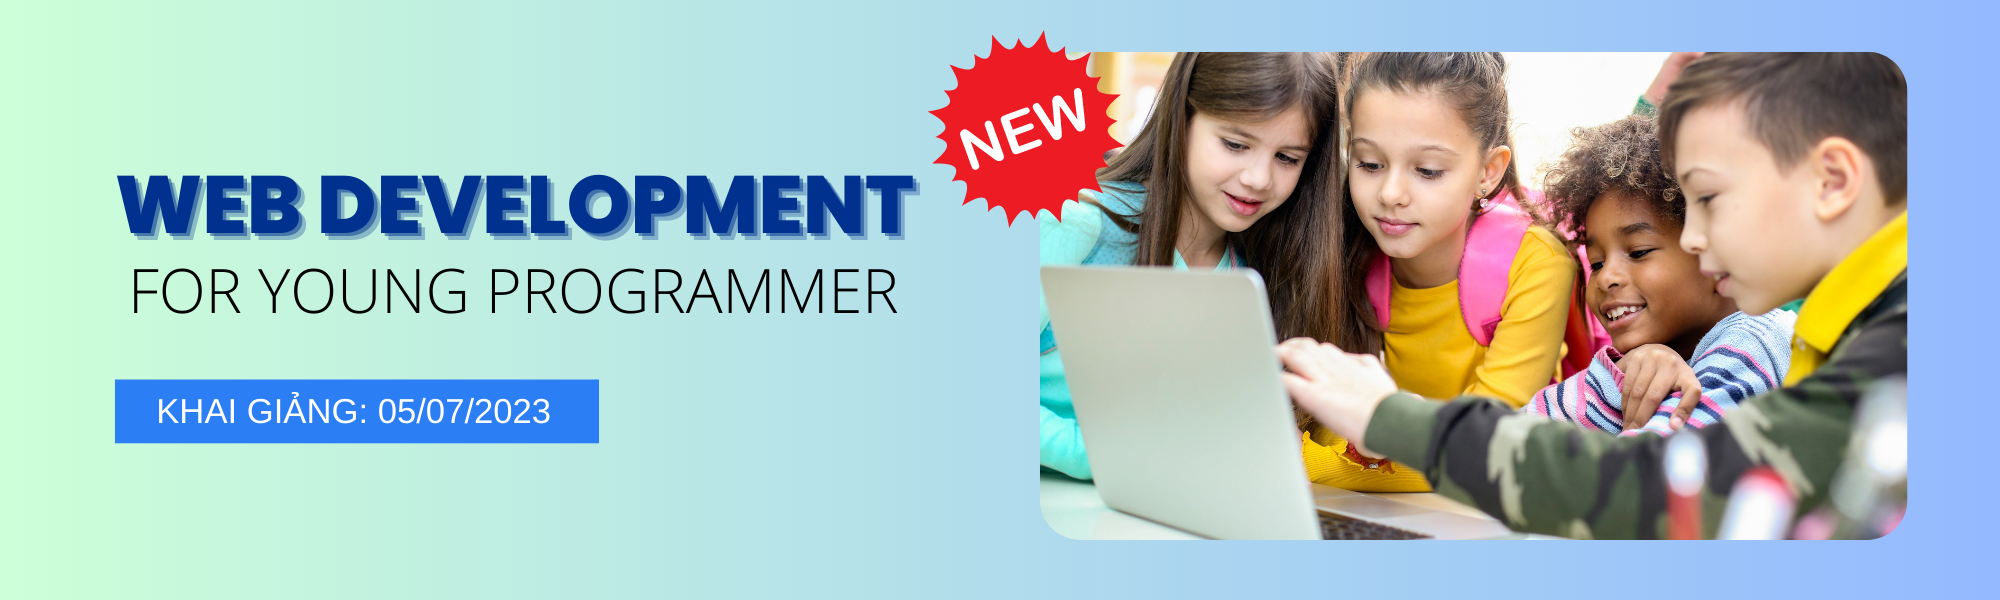 Web Development for Young Programmer